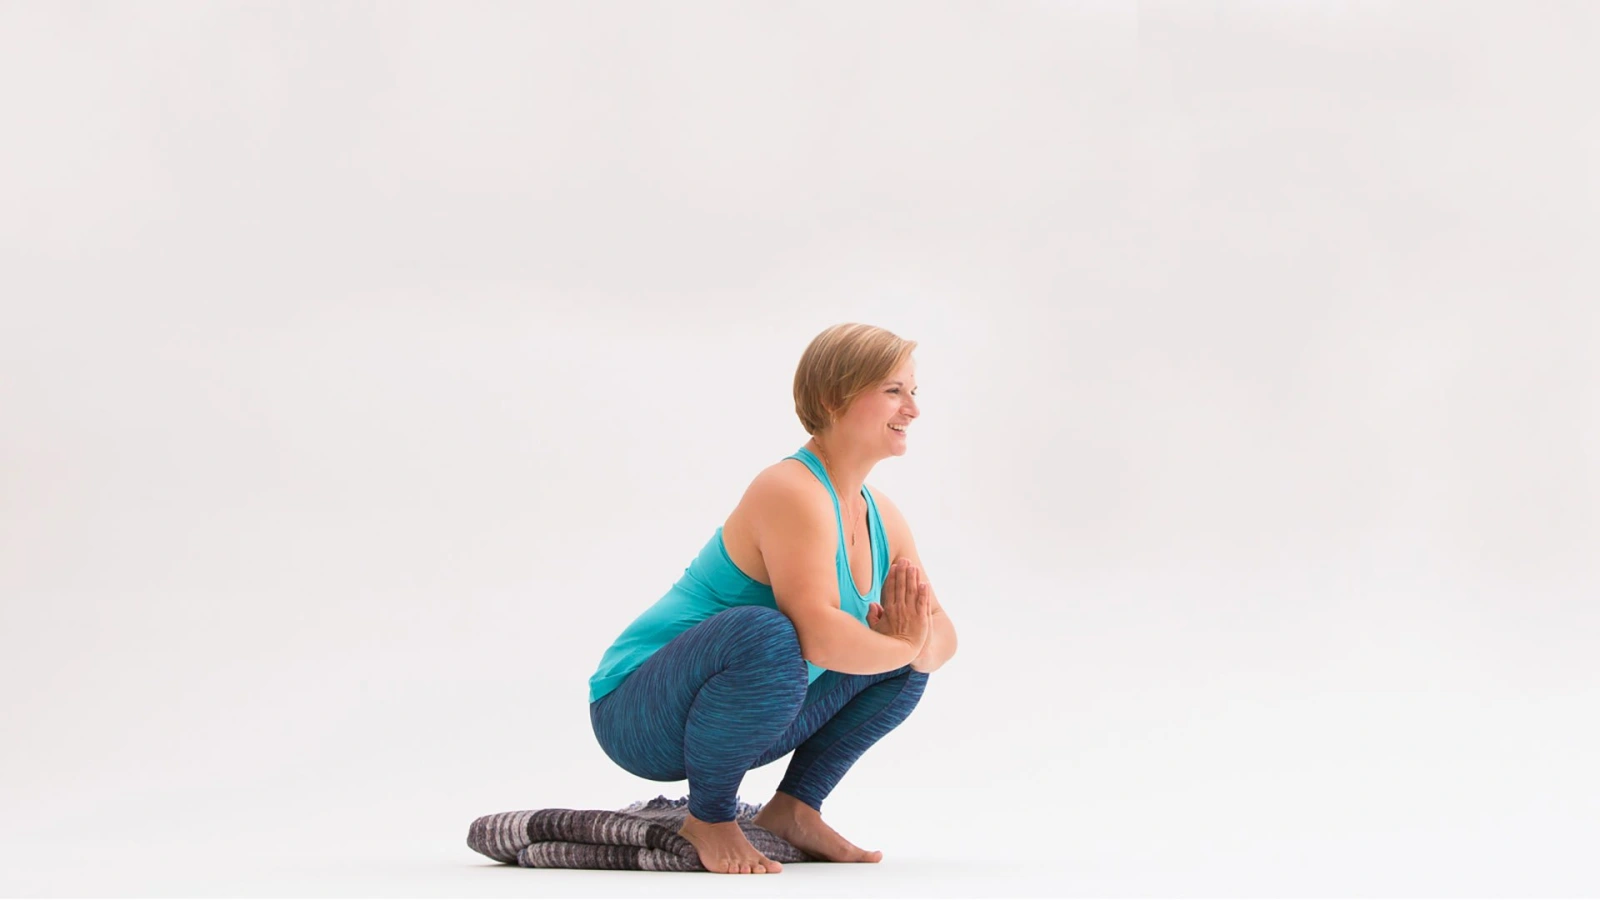 Somatic Yoga for tight lats & IT band - release the stress & tension